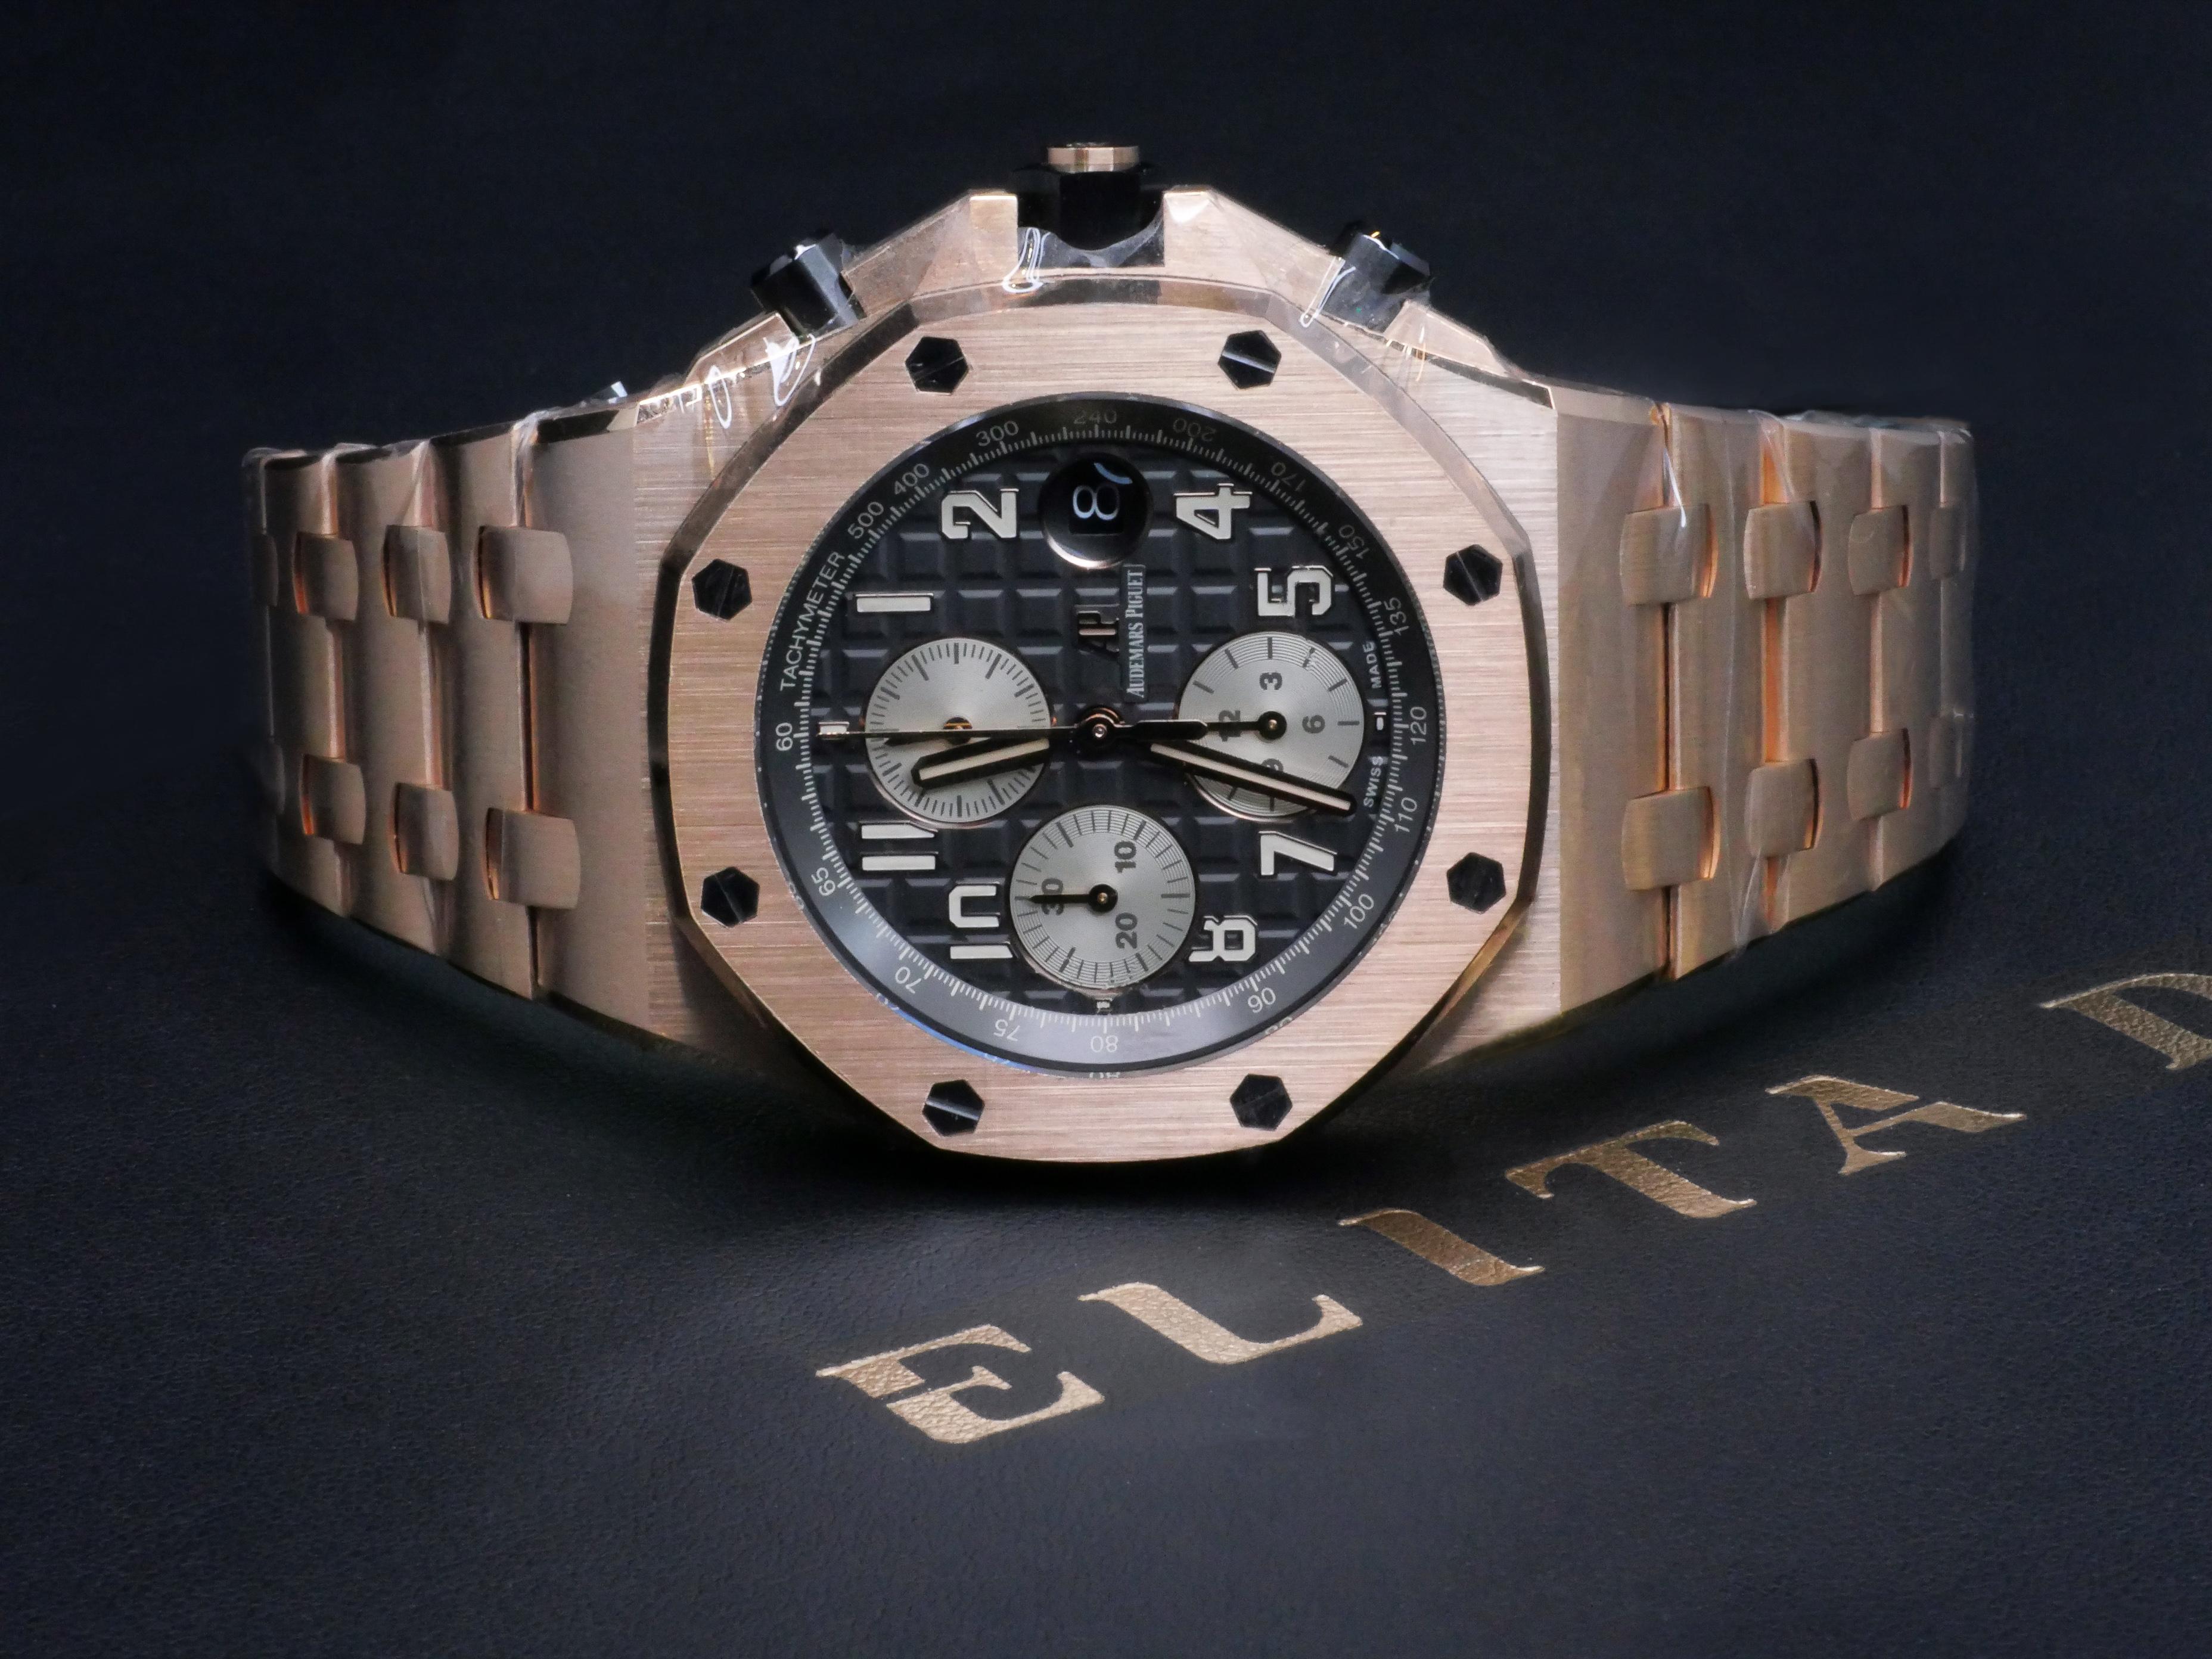 Audemars Piguet Royal Oak Offshore Chronograph 

Precious metals and a game of contrasts bring new character to the Royal Oak Offshore. Grey on pink: 18-carat pink gold case and bracelet harmonise with grey ruthenium-toned dial and inner bezel as